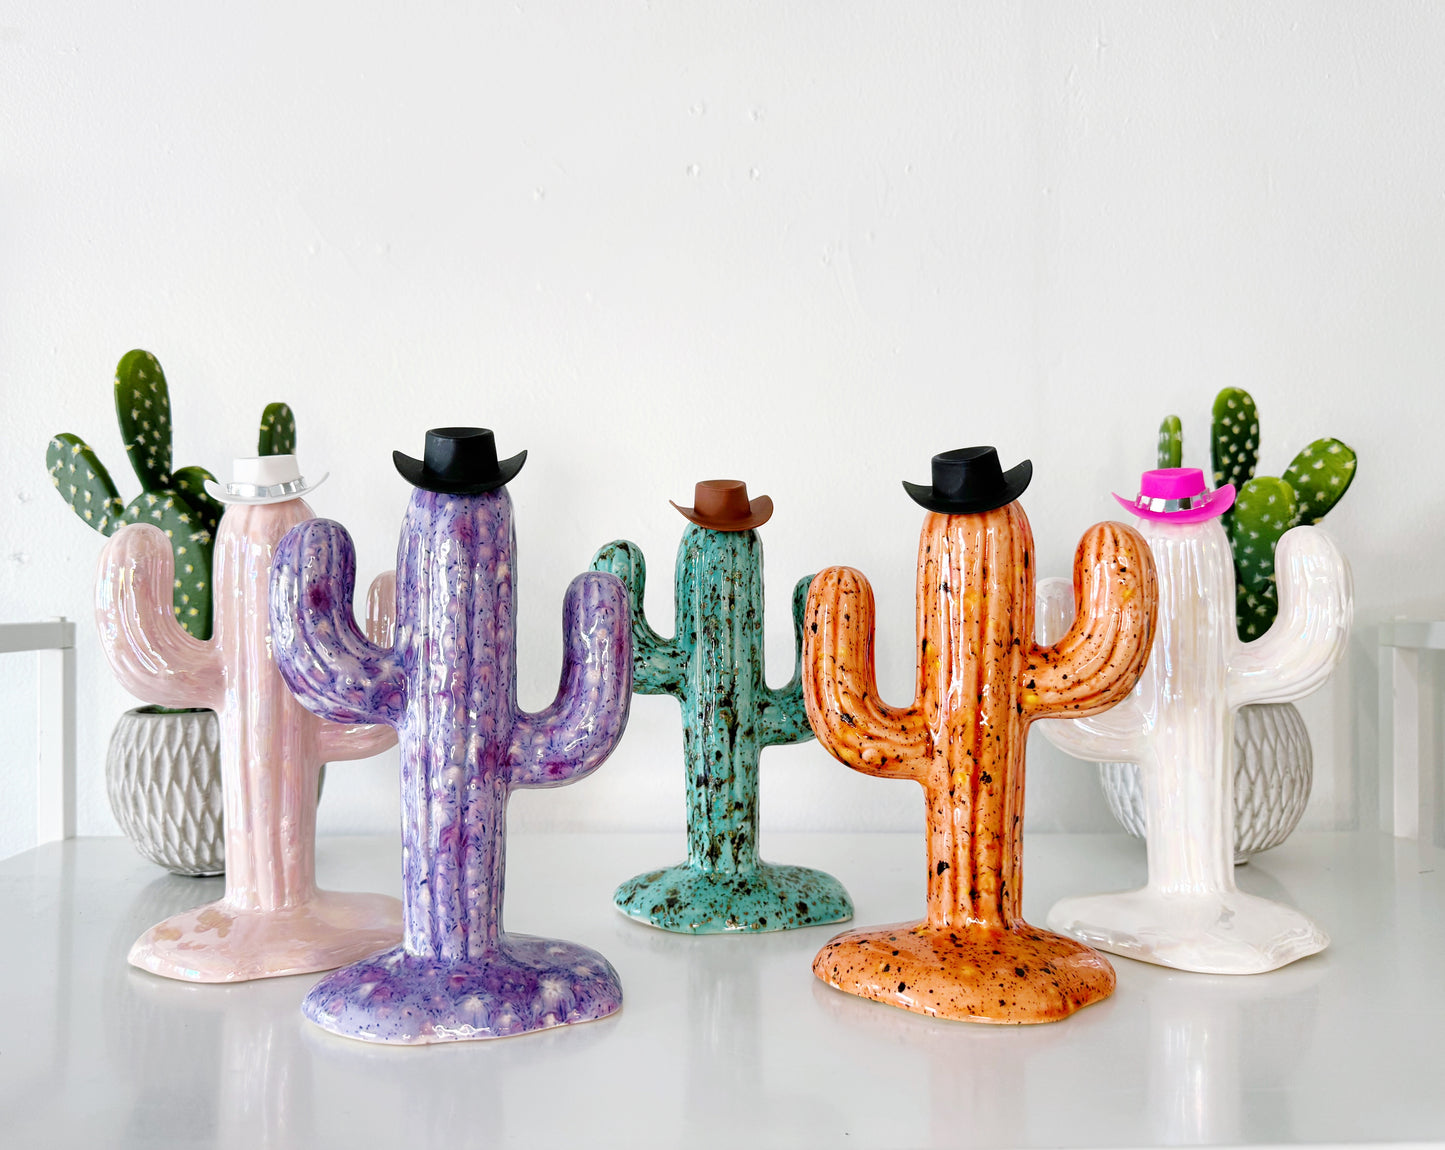 Country Ceramic Cactus Tree - The Dolly